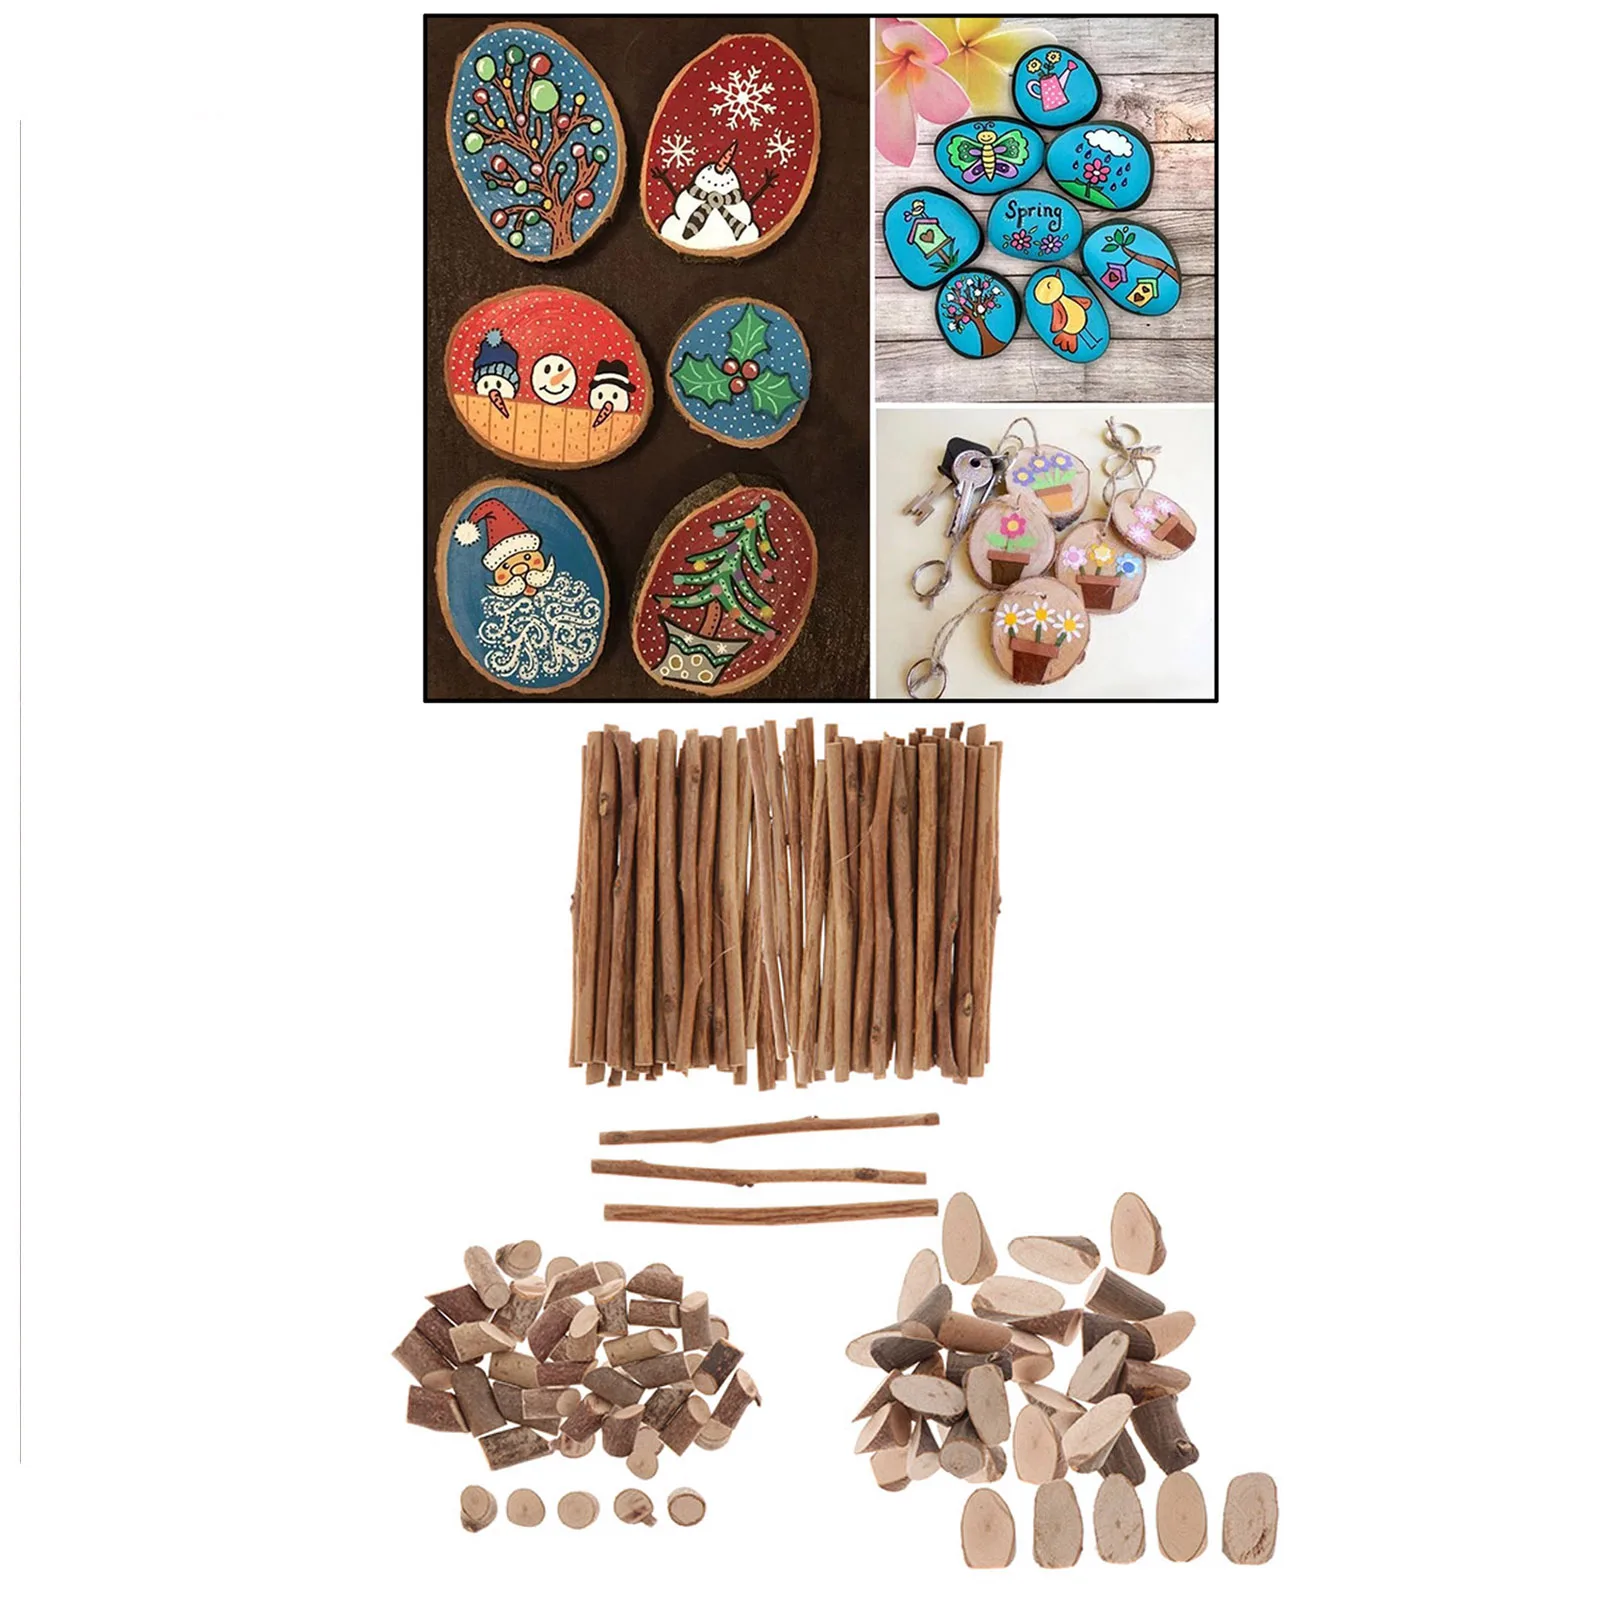 Unfinished Wooden Slices Decorations DIY Art Crafts for Home Party Chritsmas Wedding Room